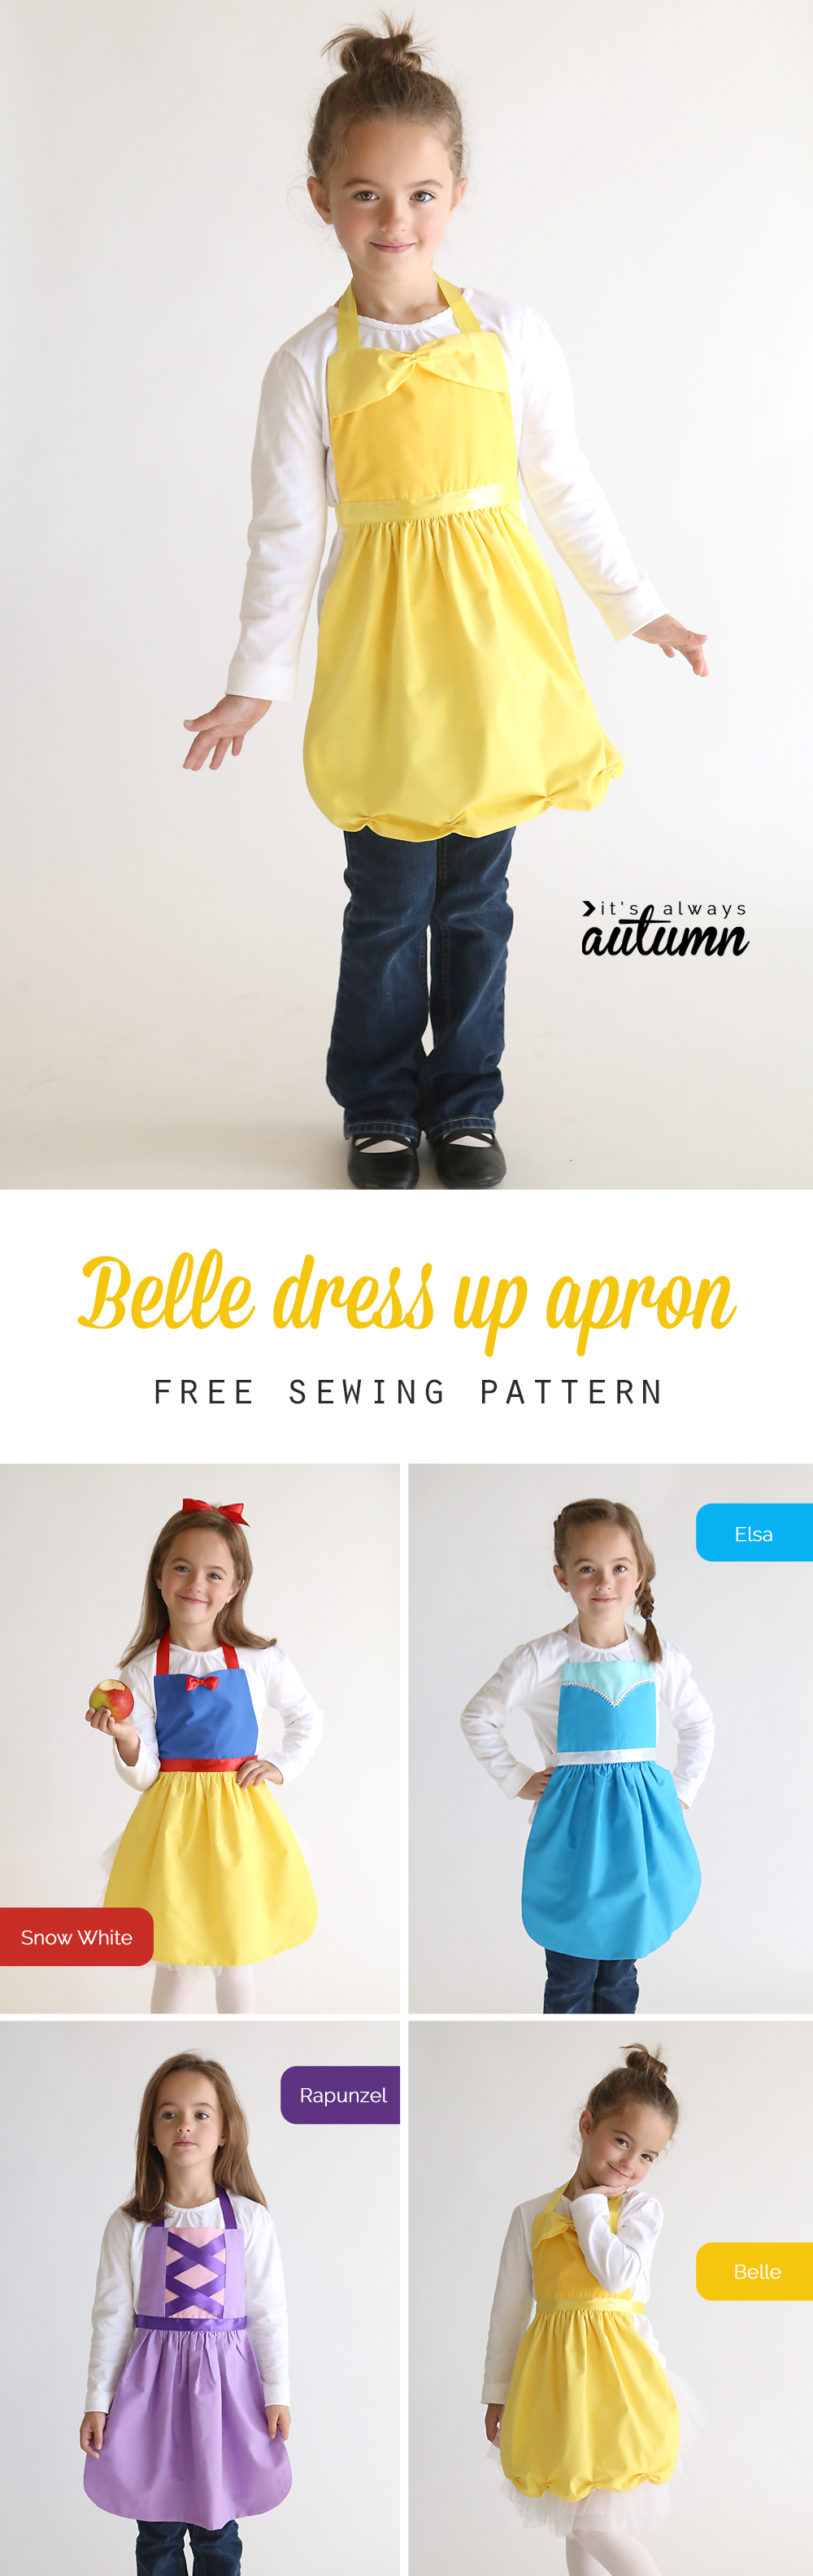 Free Sewing Pattern For Belle Princess Dress Up Apron Its